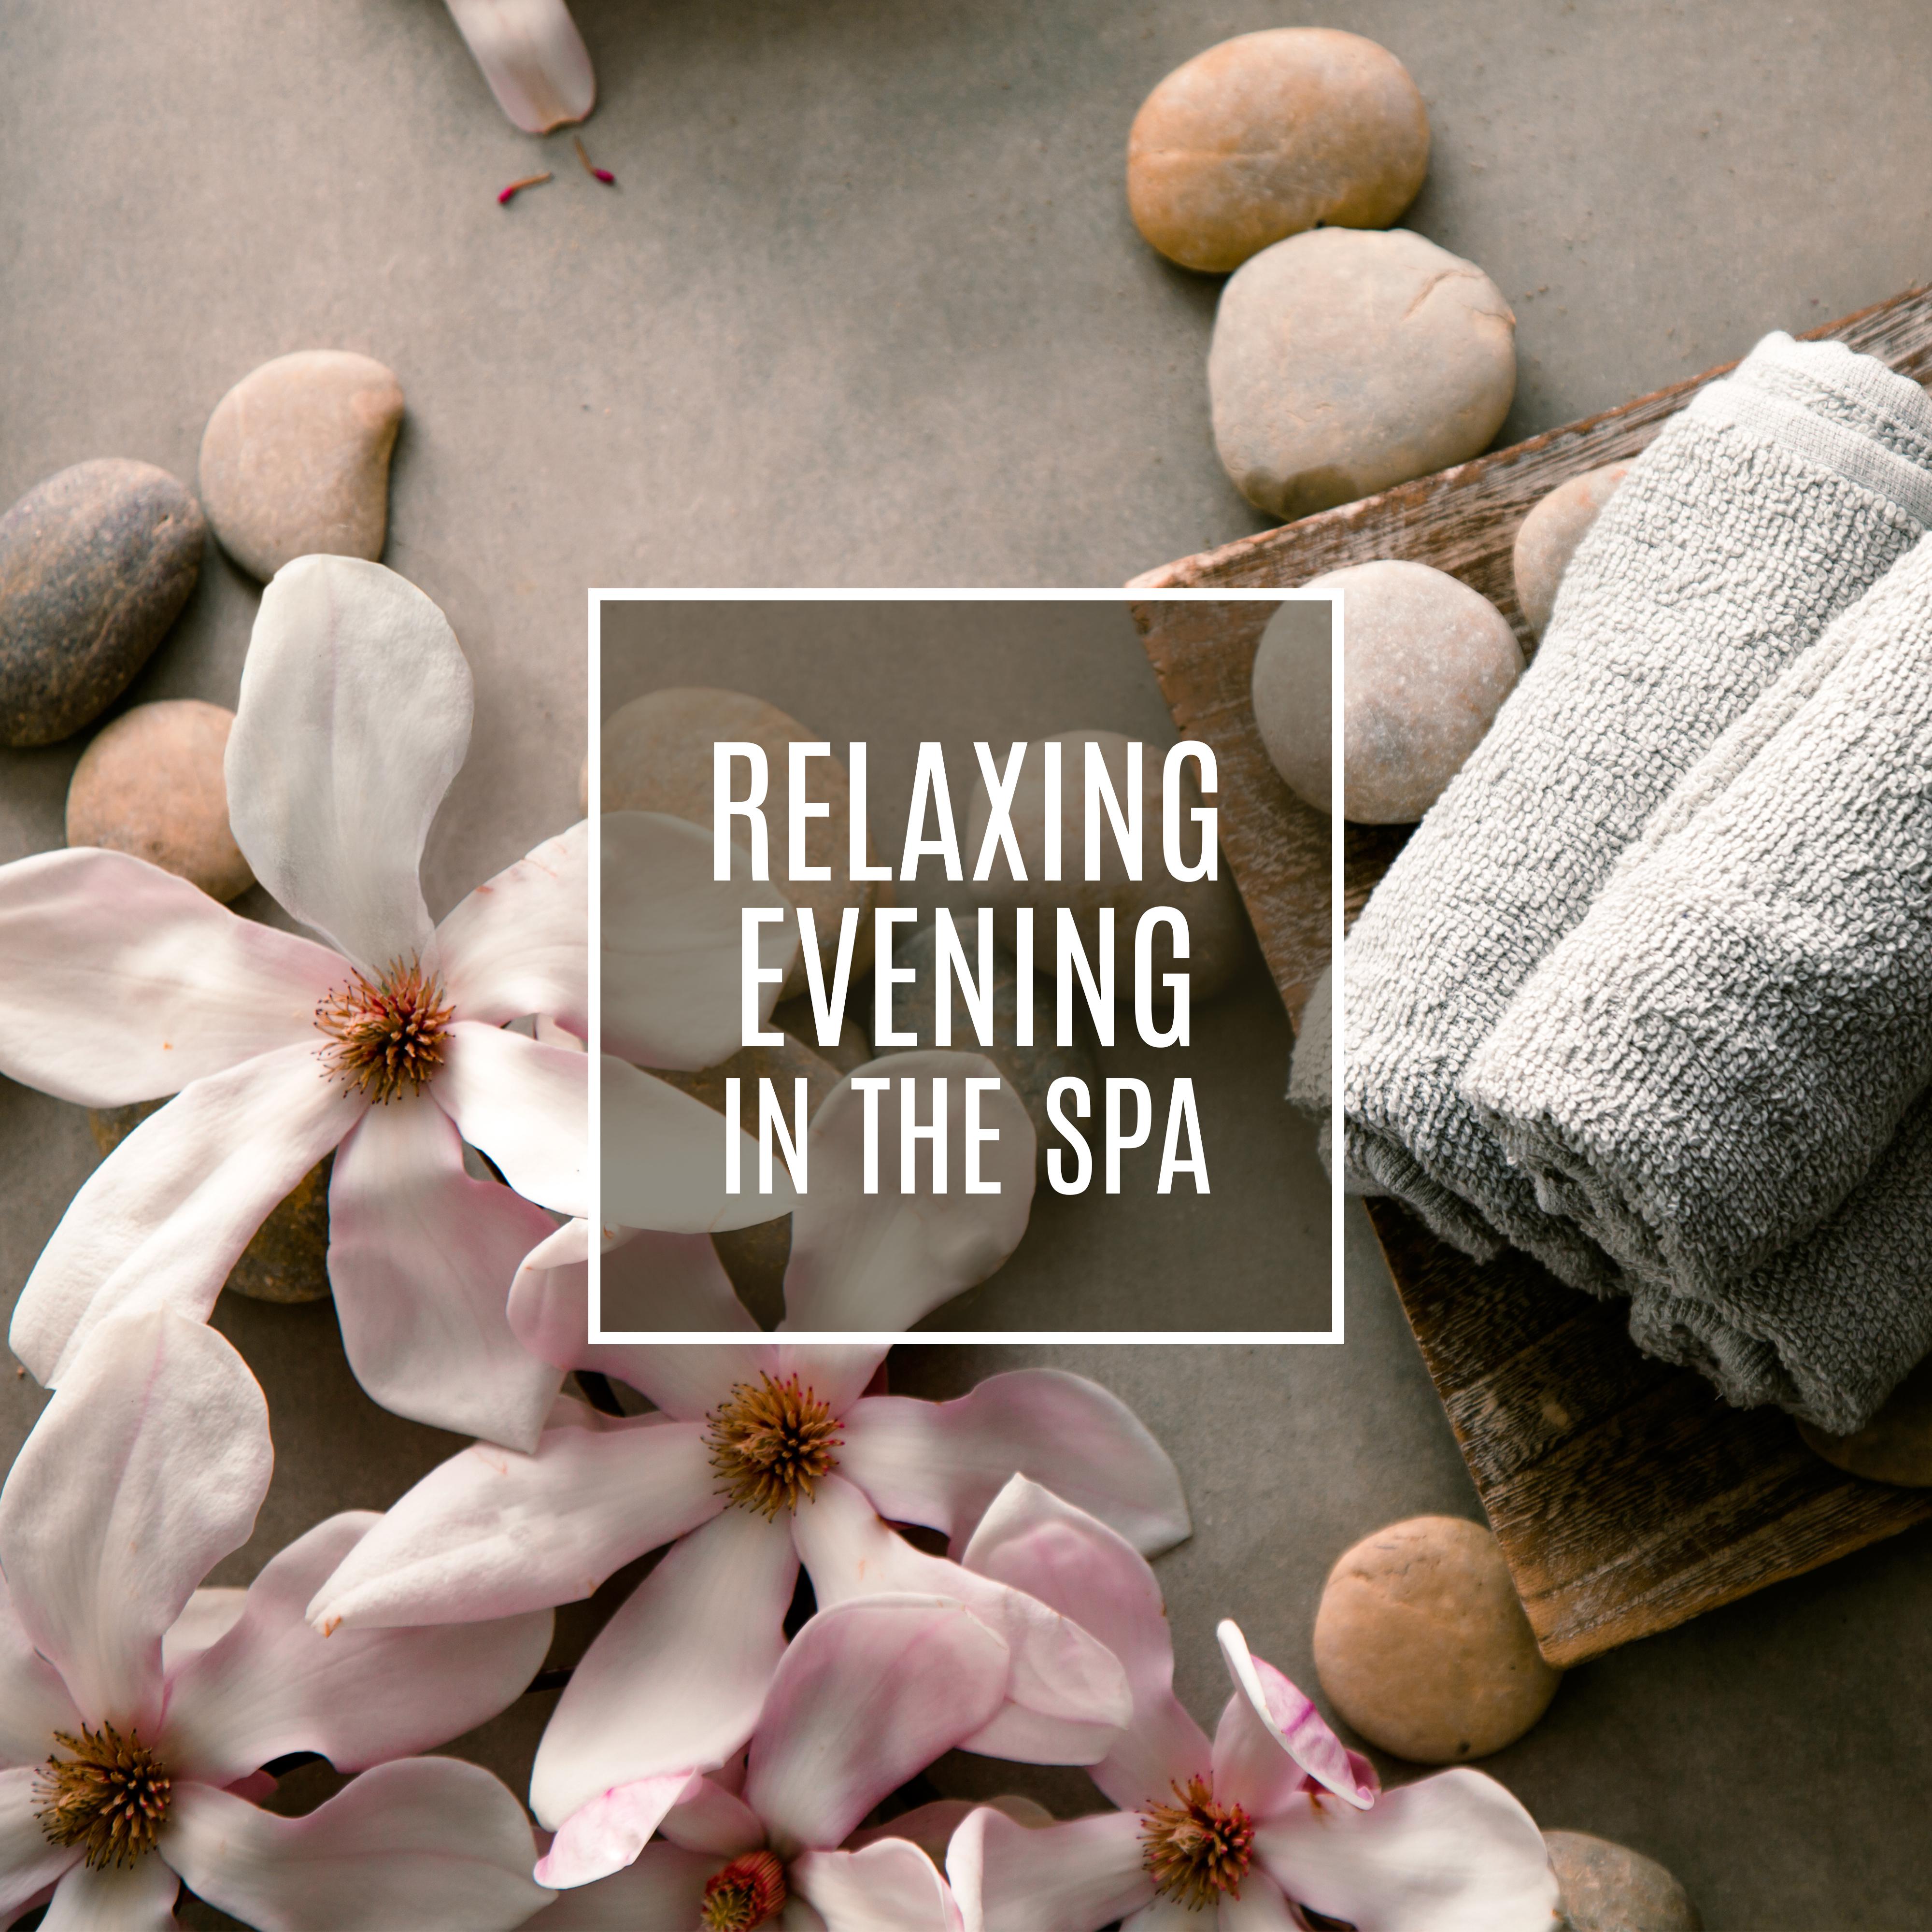 Relaxing Evening in the Spa: Selection of Best 2019 New Age Soft Songs for Spa Salon, Wellness & Massage, Hot Baths, Sauna Music, Healing Nature Sounds